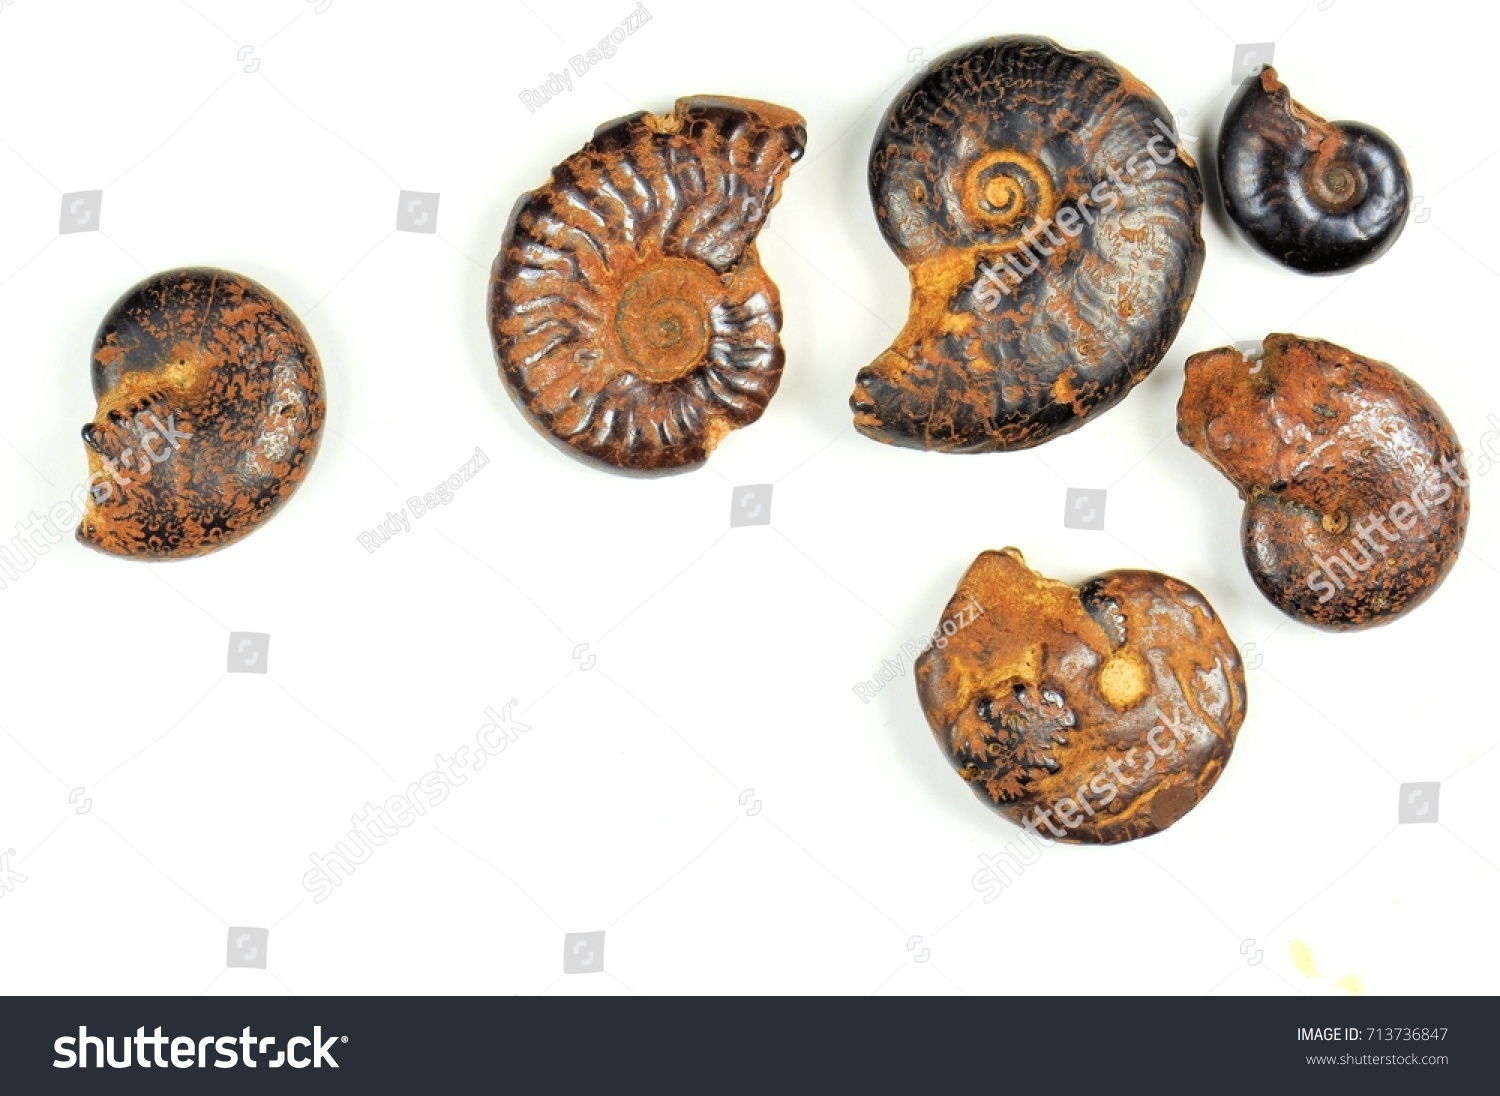 Ammonites fossils on a white background. 400 million years. Cretaceous-Devonian period. #713736847